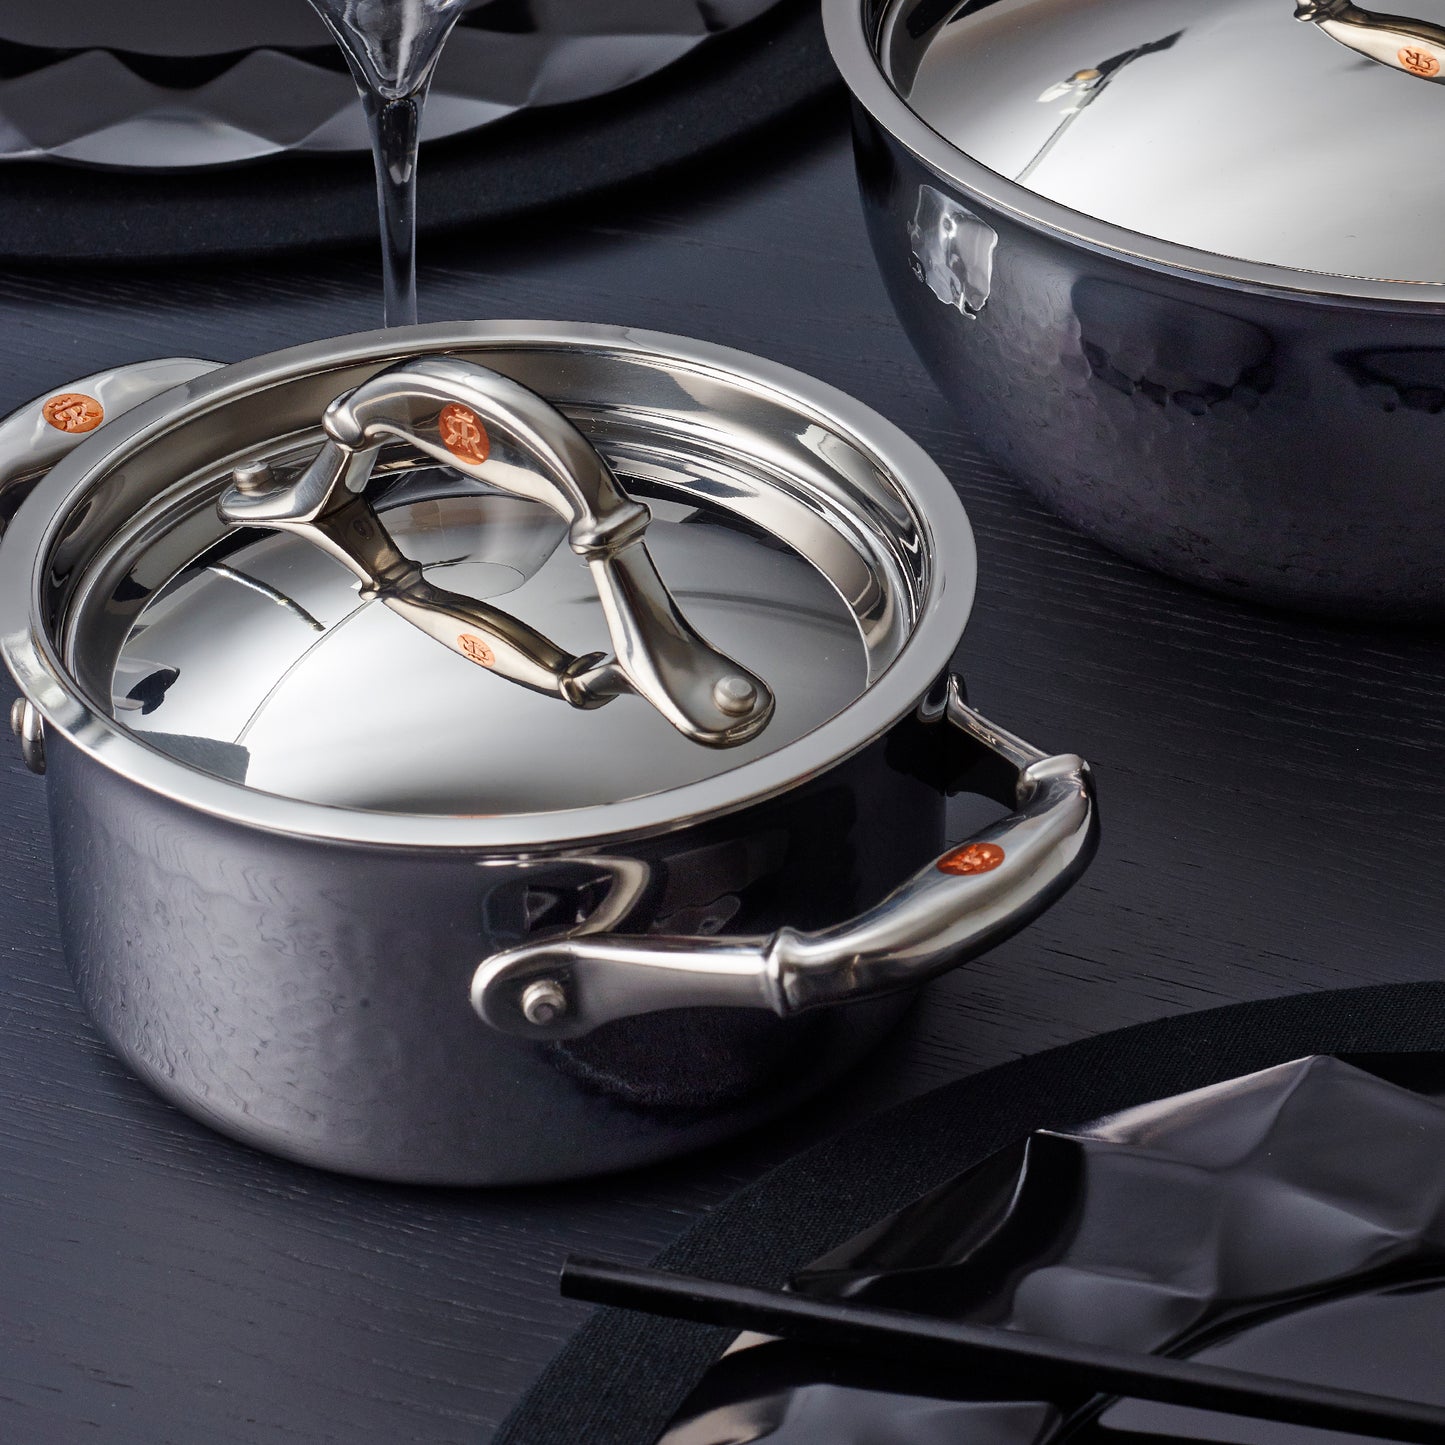  Hammered clad stainless steel cookware from Ruffoni